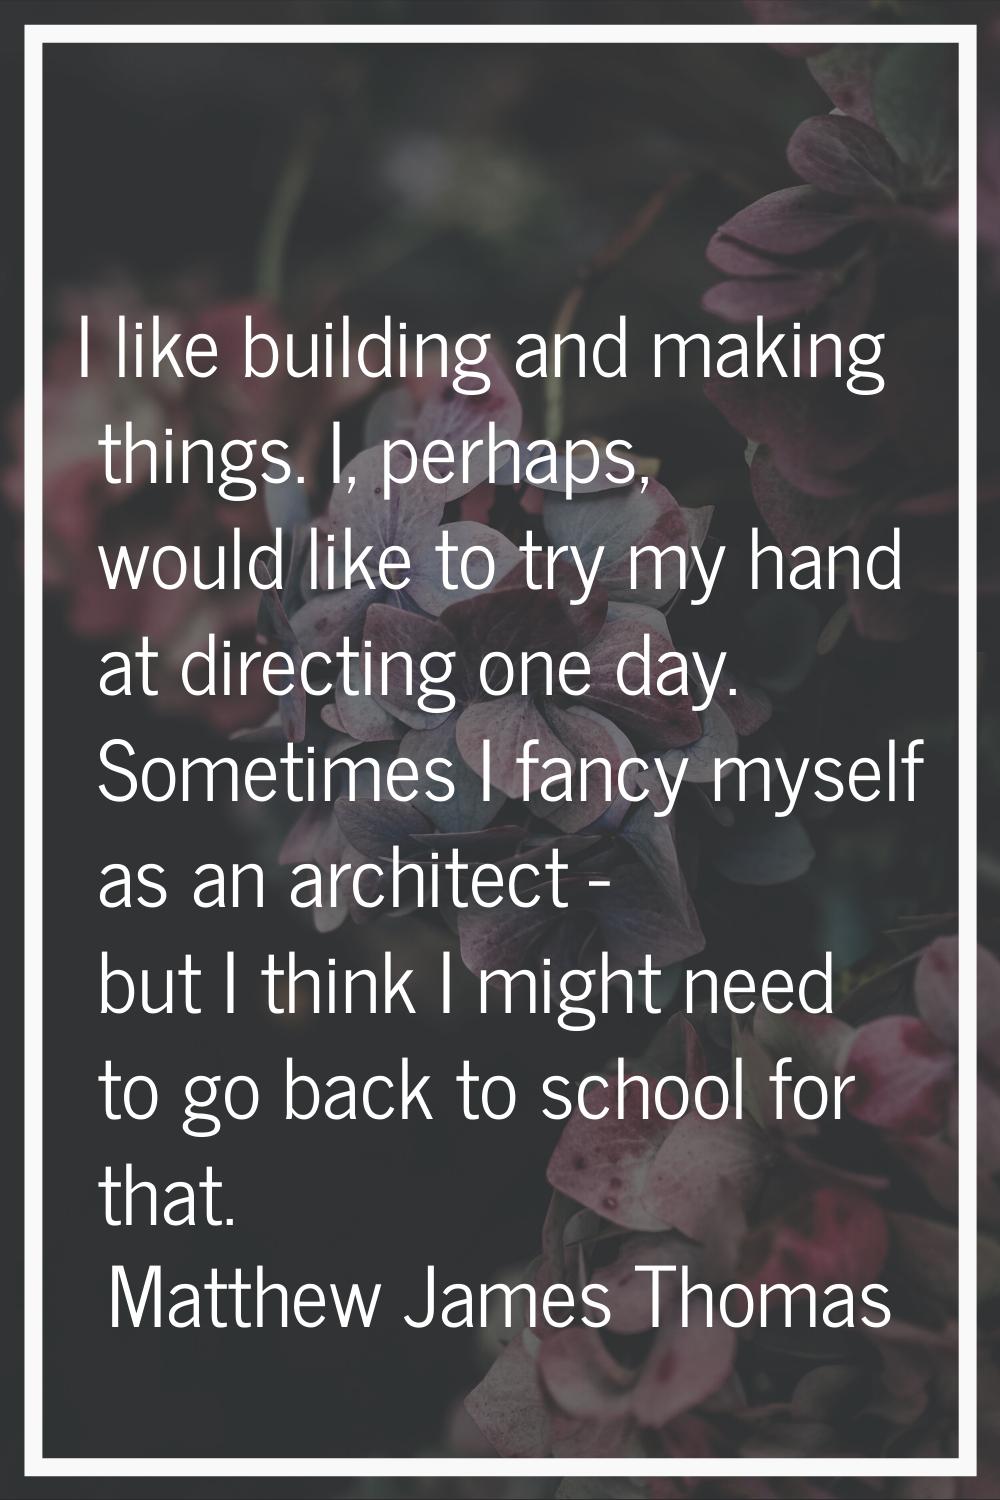 I like building and making things. I, perhaps, would like to try my hand at directing one day. Some